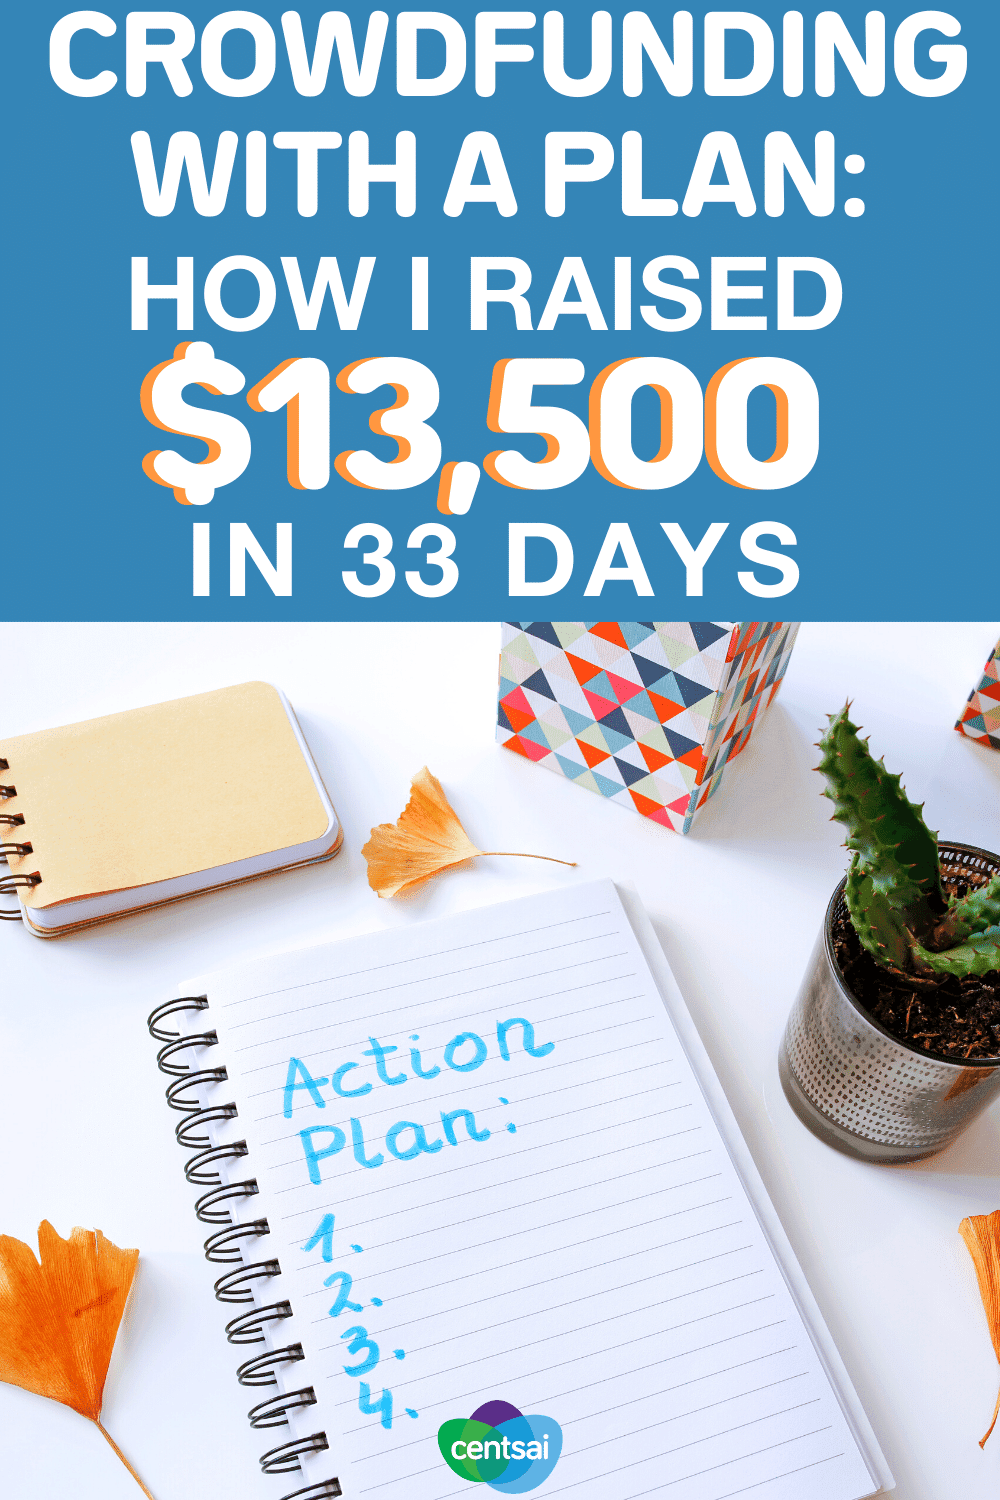 Crowdfunding With a Plan_ How I Raised $13,500 in 33 Days